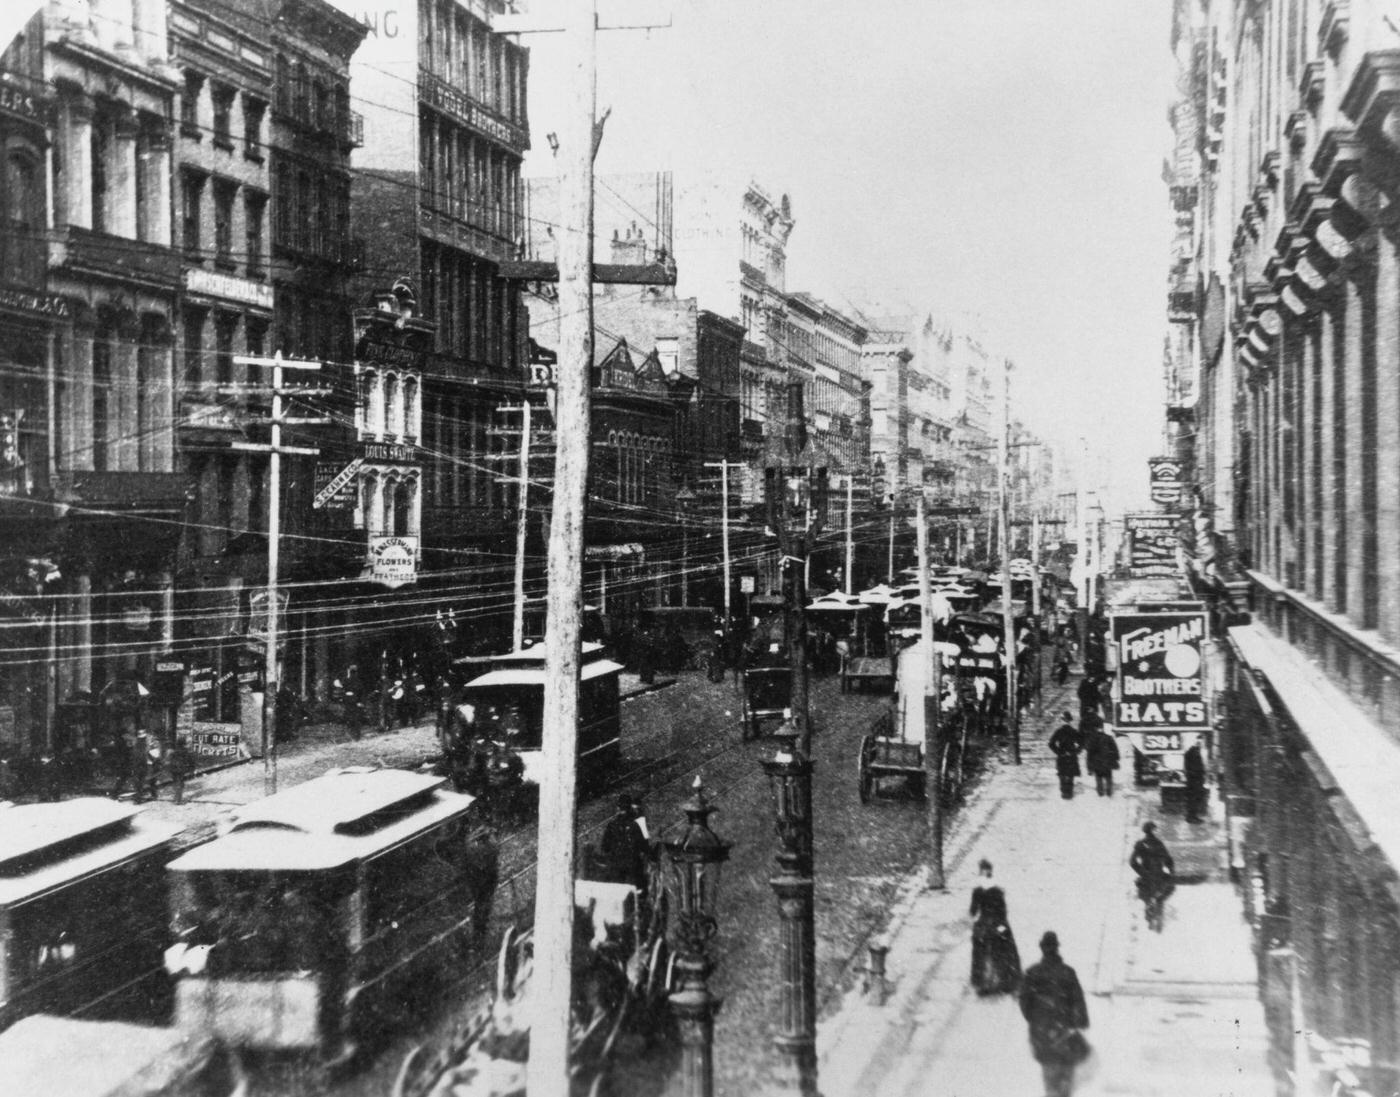 Traffic On Broadway From The Metropolitan Hotel, 1880